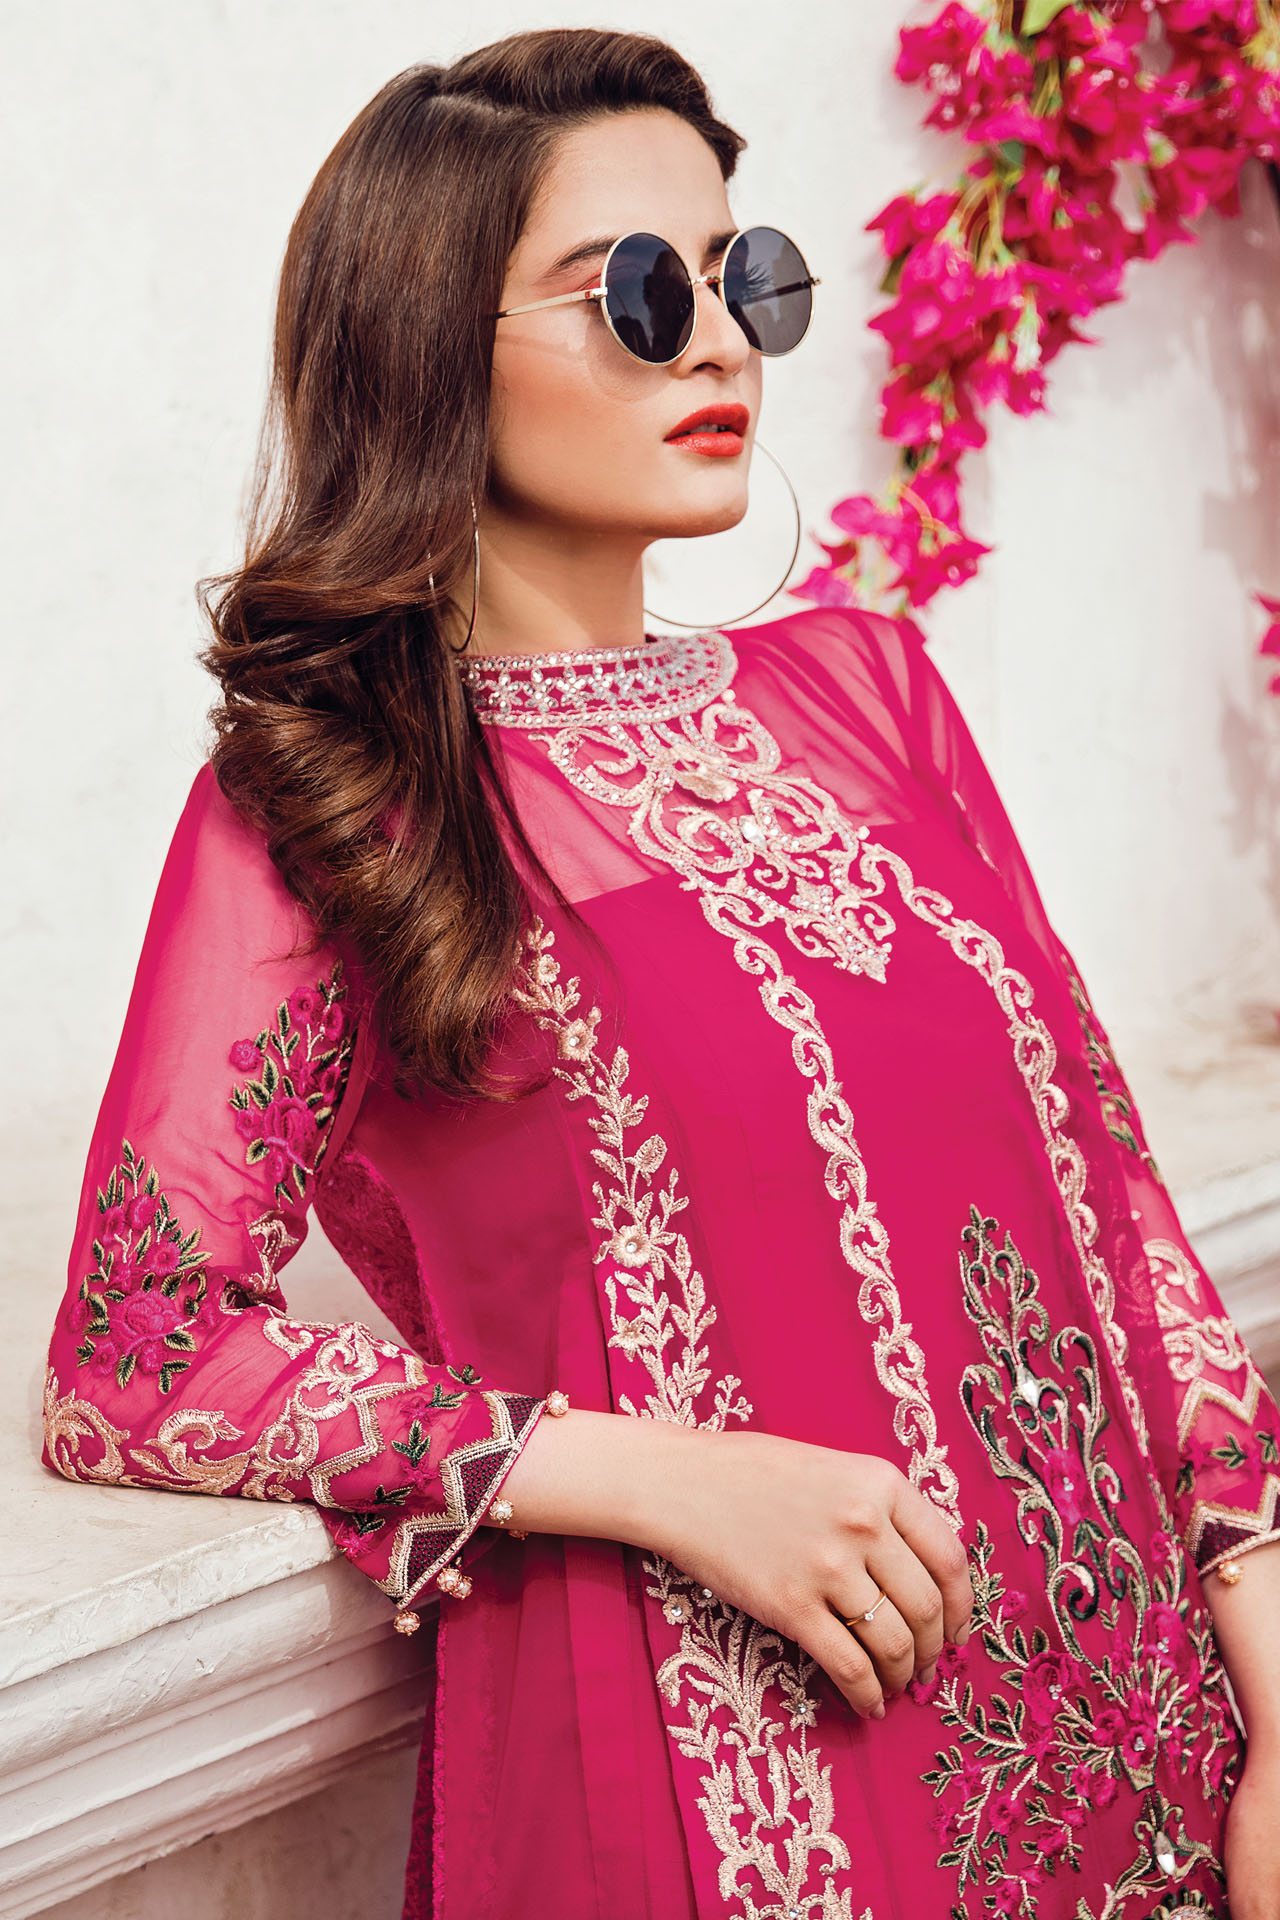 This refreshing pink chiffon dress available at a reasonable price online by Imrozia Premium Eid wear collection 2018